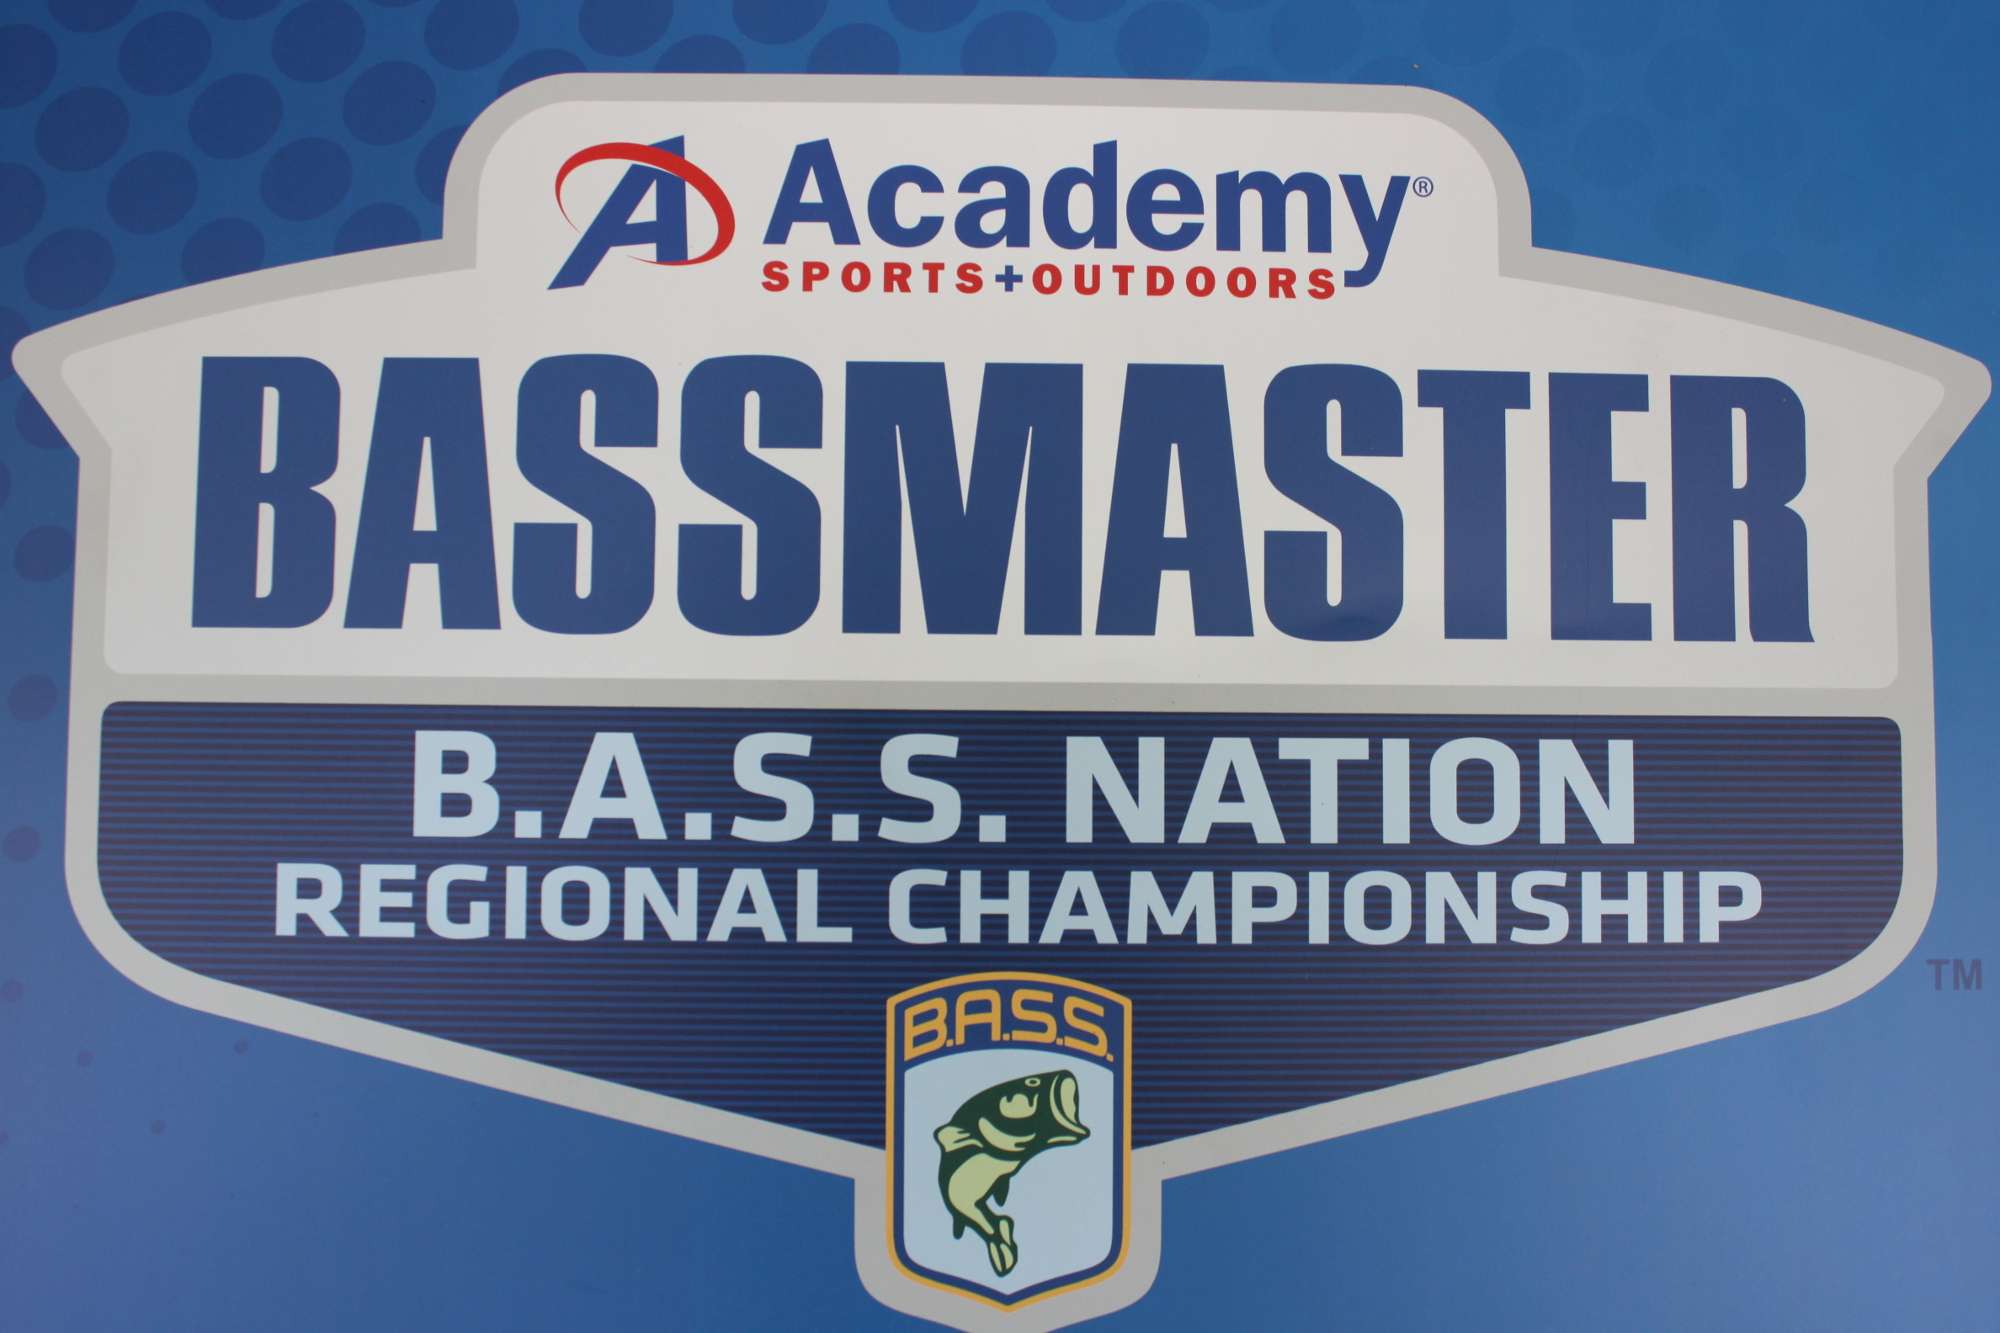 To do so, their team would have to be one of 17 others entered in this â the Academy Sports + Outdoors Bassmaster B.A.S.S. Nation Eastern Regional presented by Magellan Outdoors.